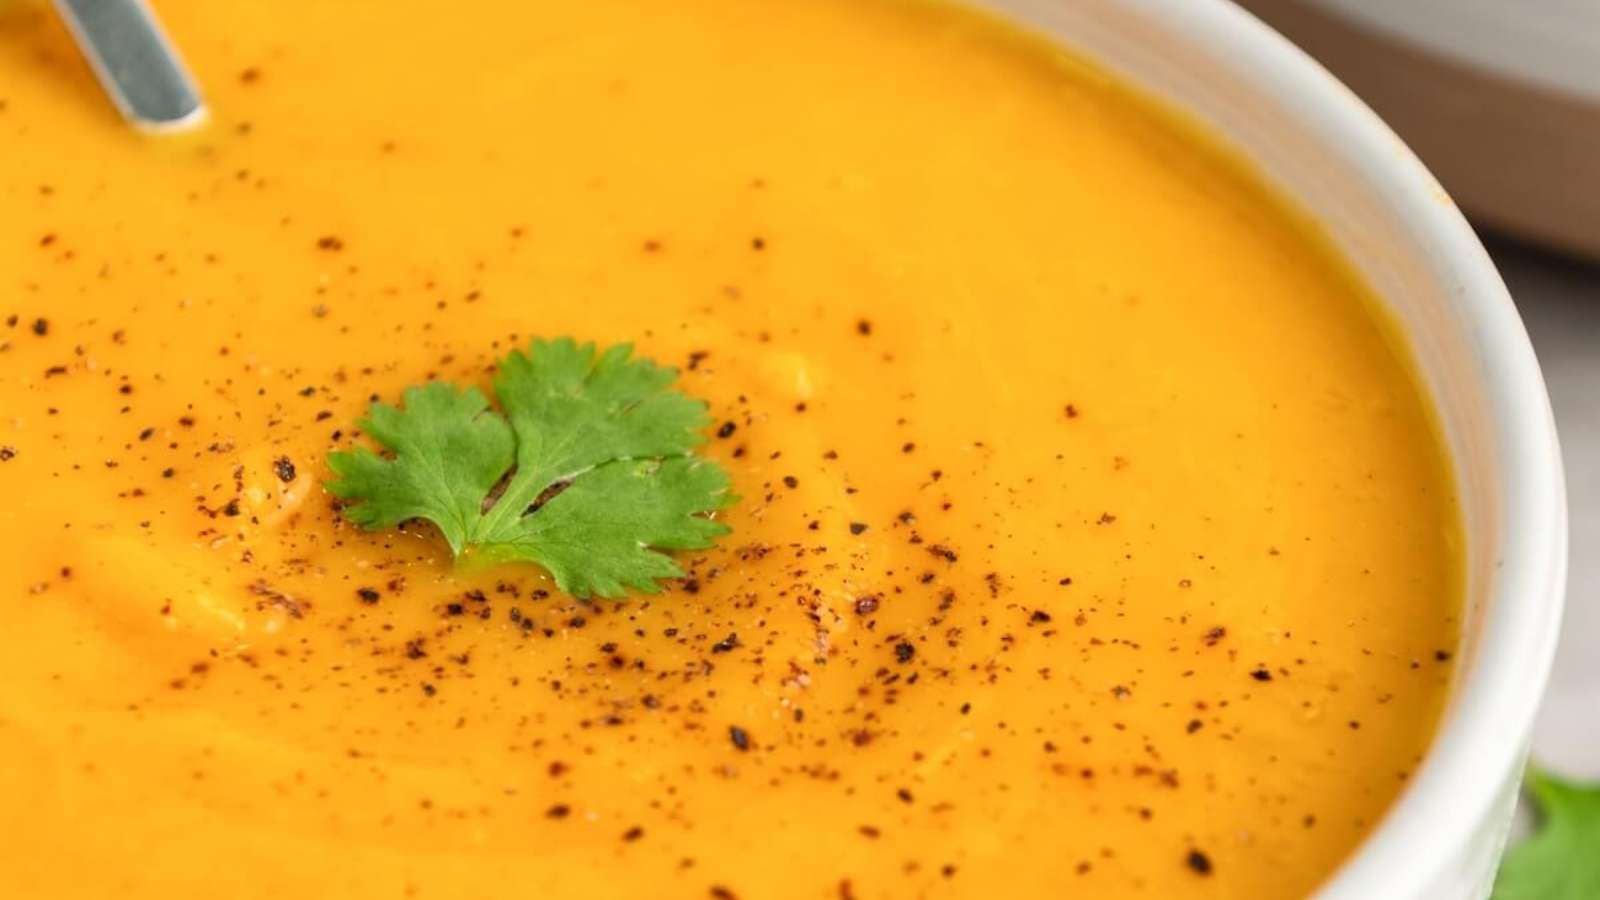 A bowl of carrot soup with a spoon.